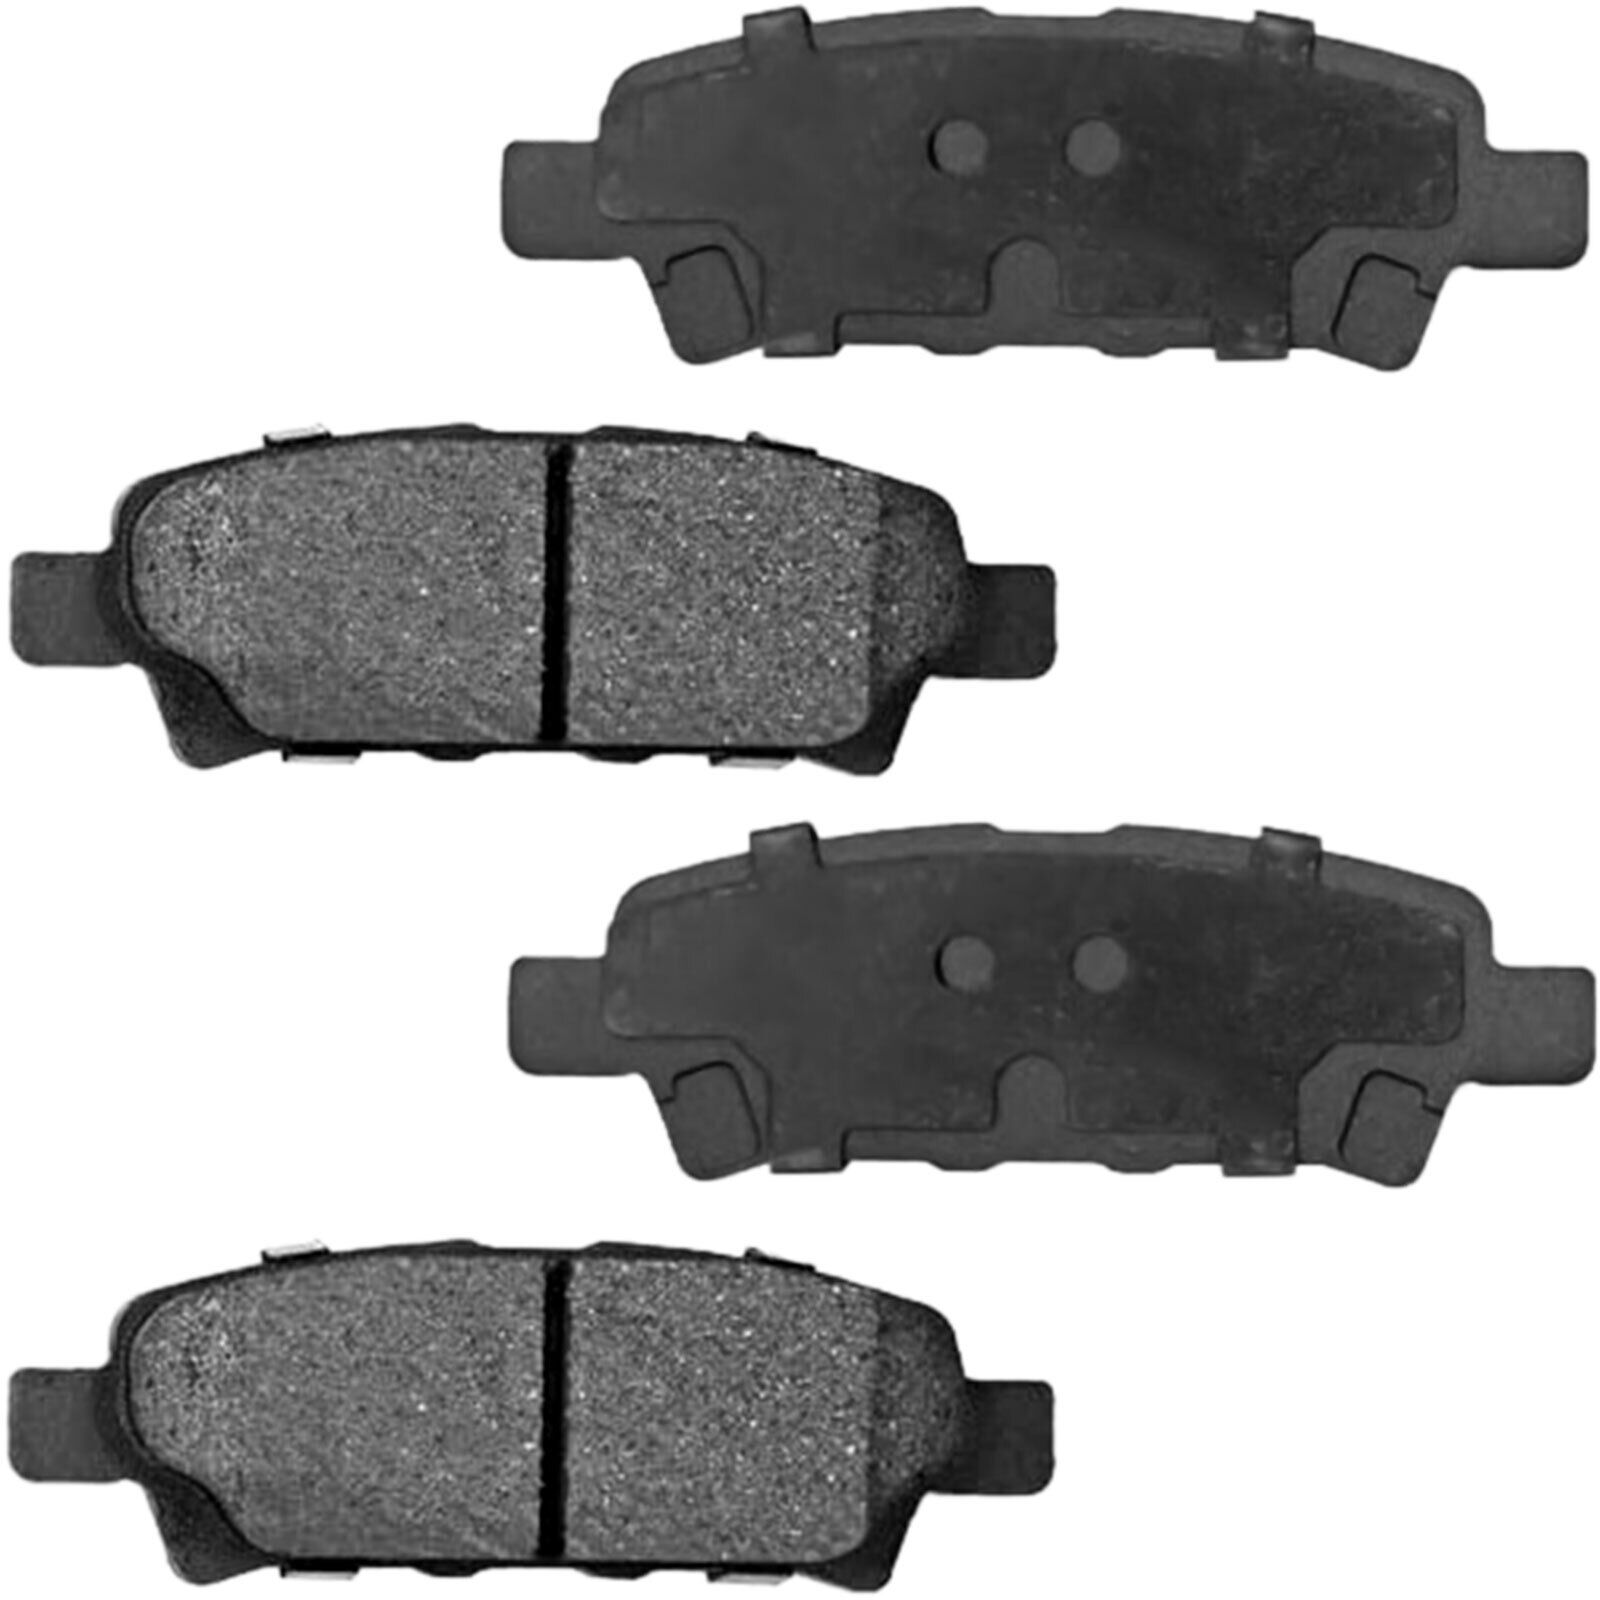 4PCS Rear Ceramic Brake Pads for Jeep Compass Patriot 2007 2008 2009-2017 IN D30